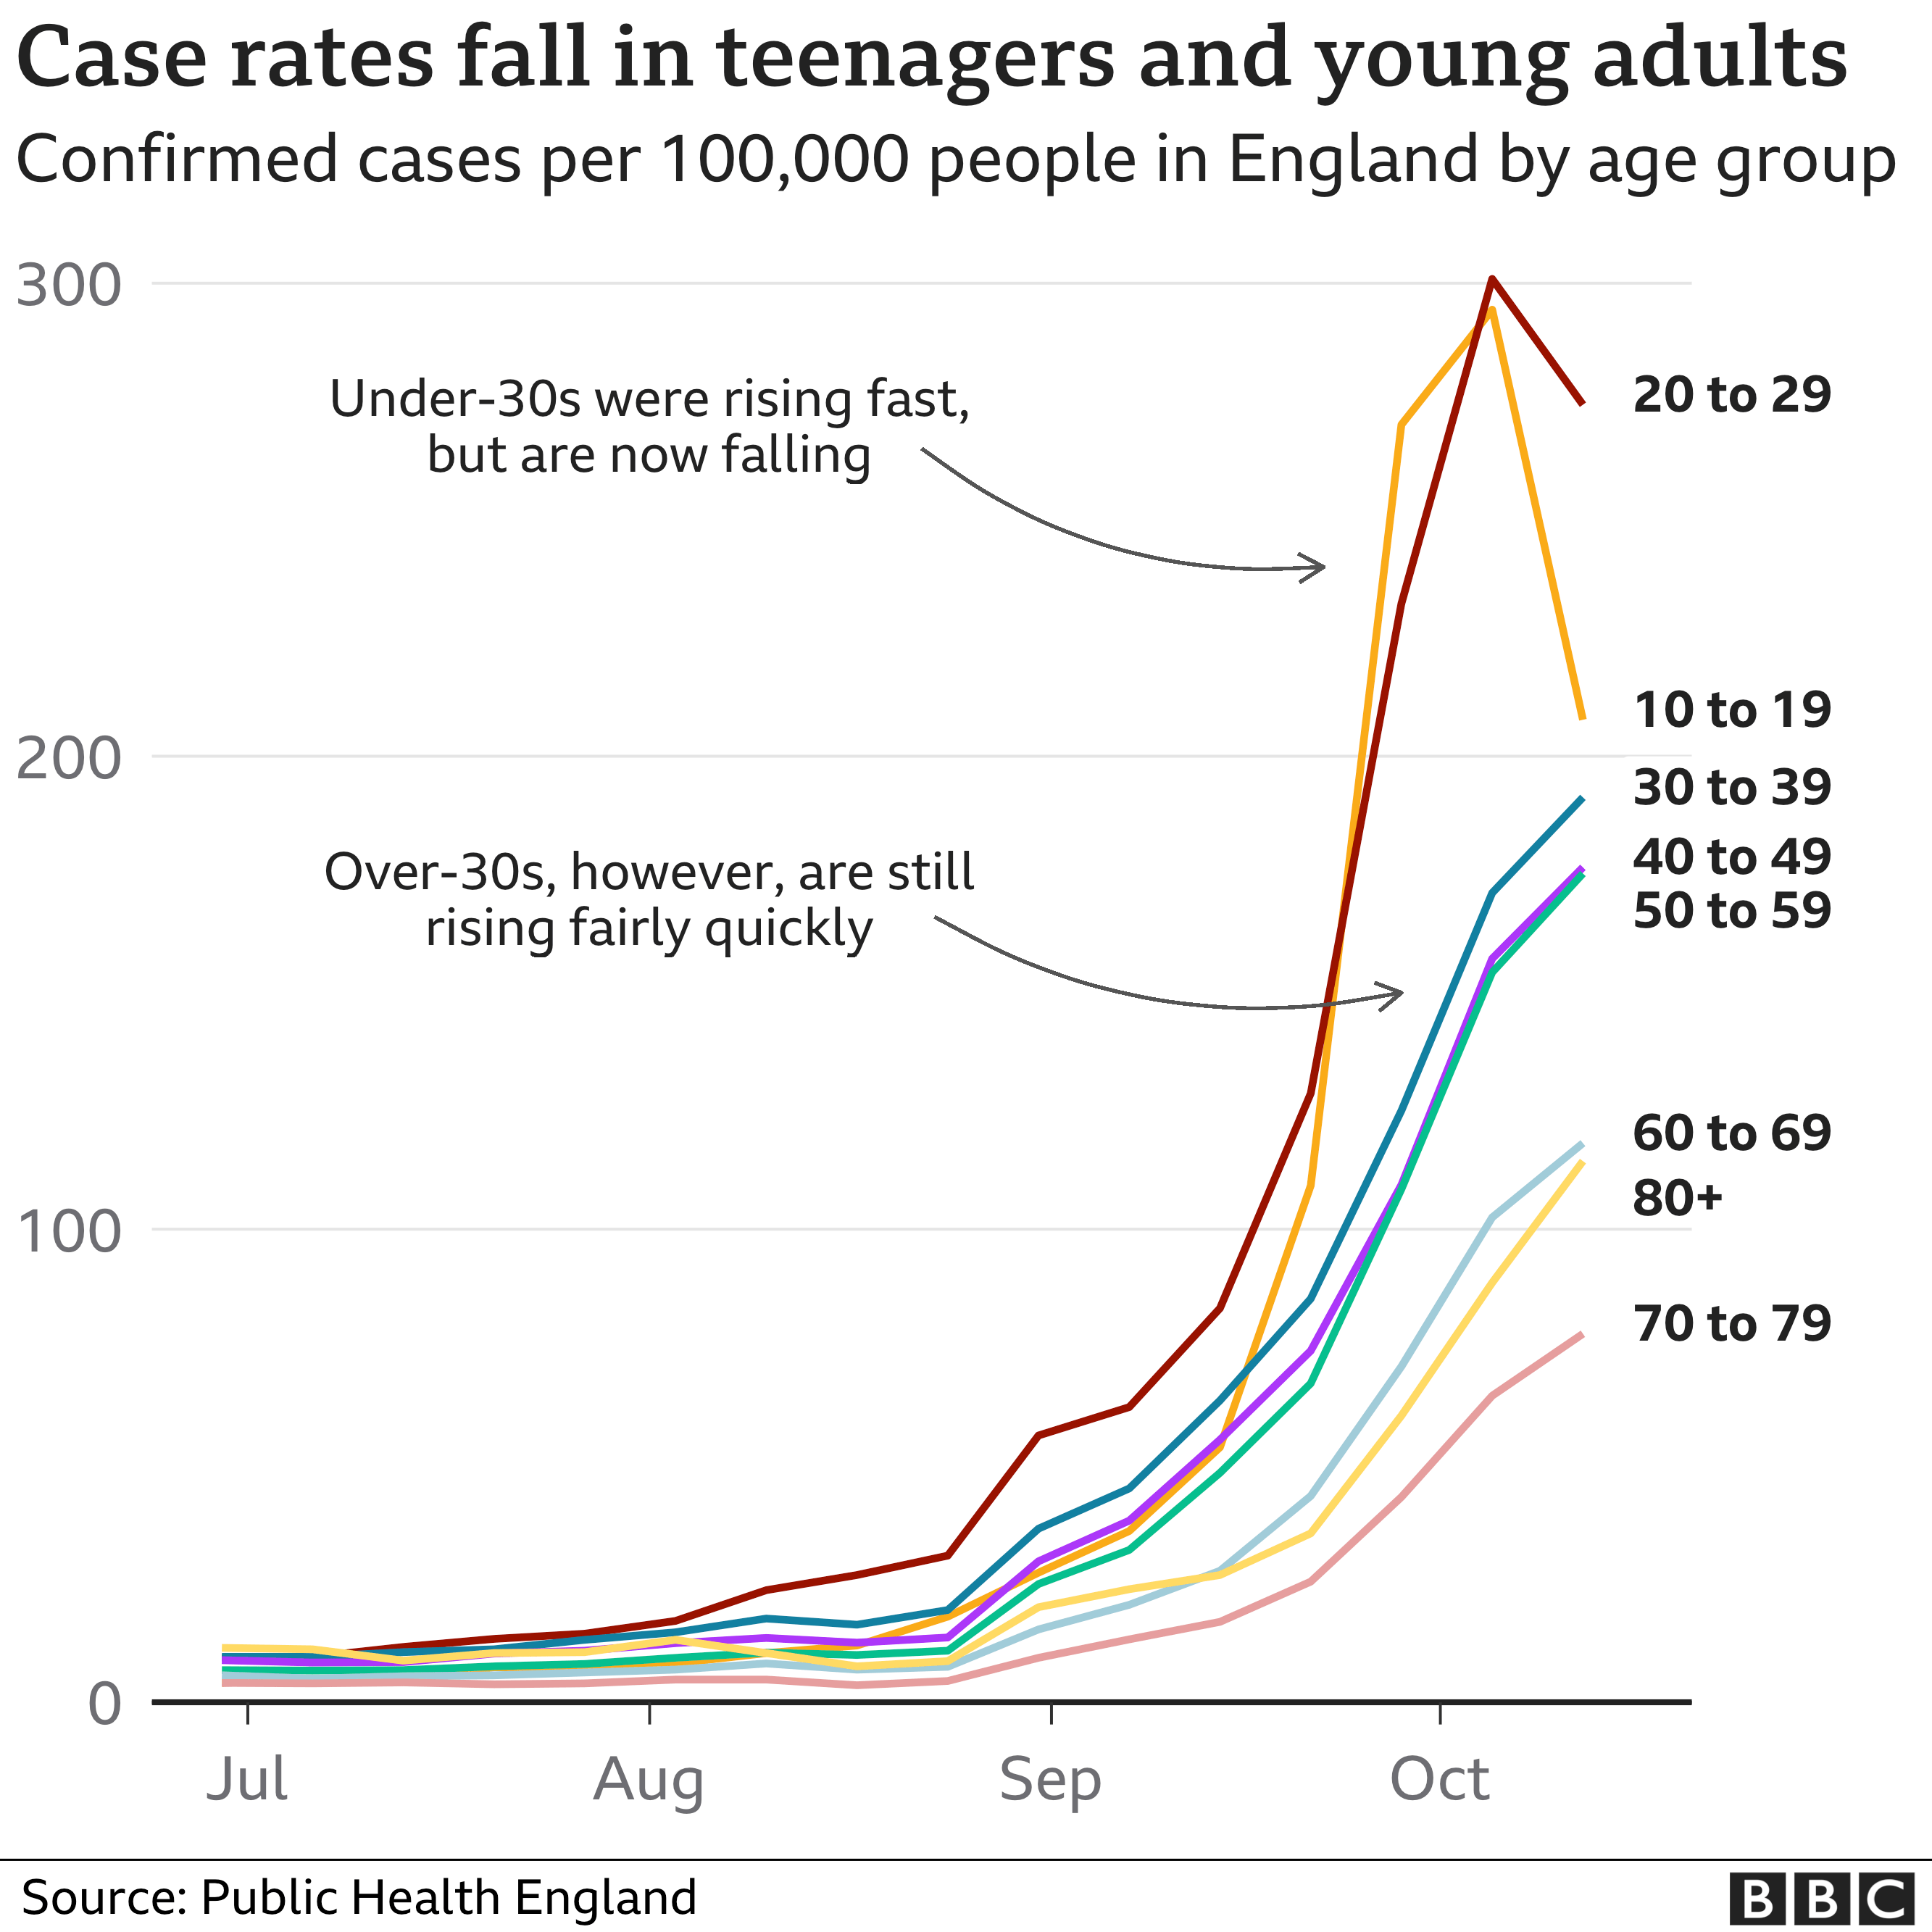 Case rates fall in teens and young adults